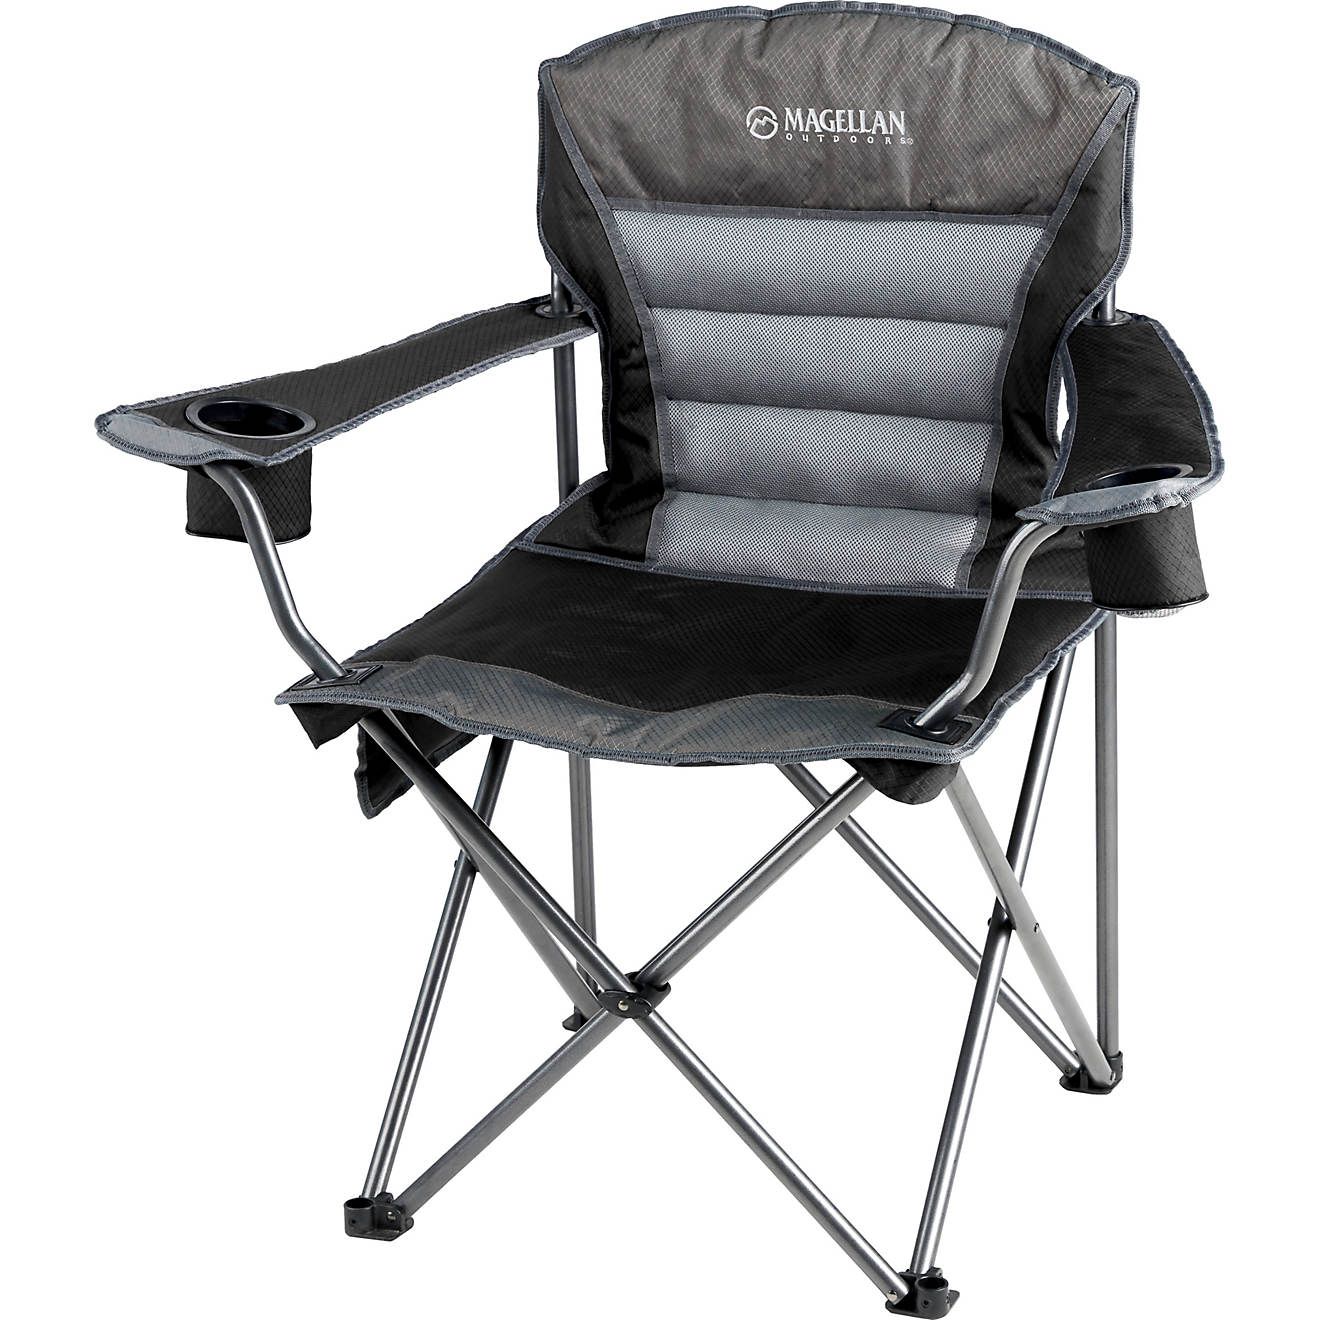 Magellan Outdoors Oversized Ultra Comfort Padded Mesh Chair | Academy | Academy Sports + Outdoors